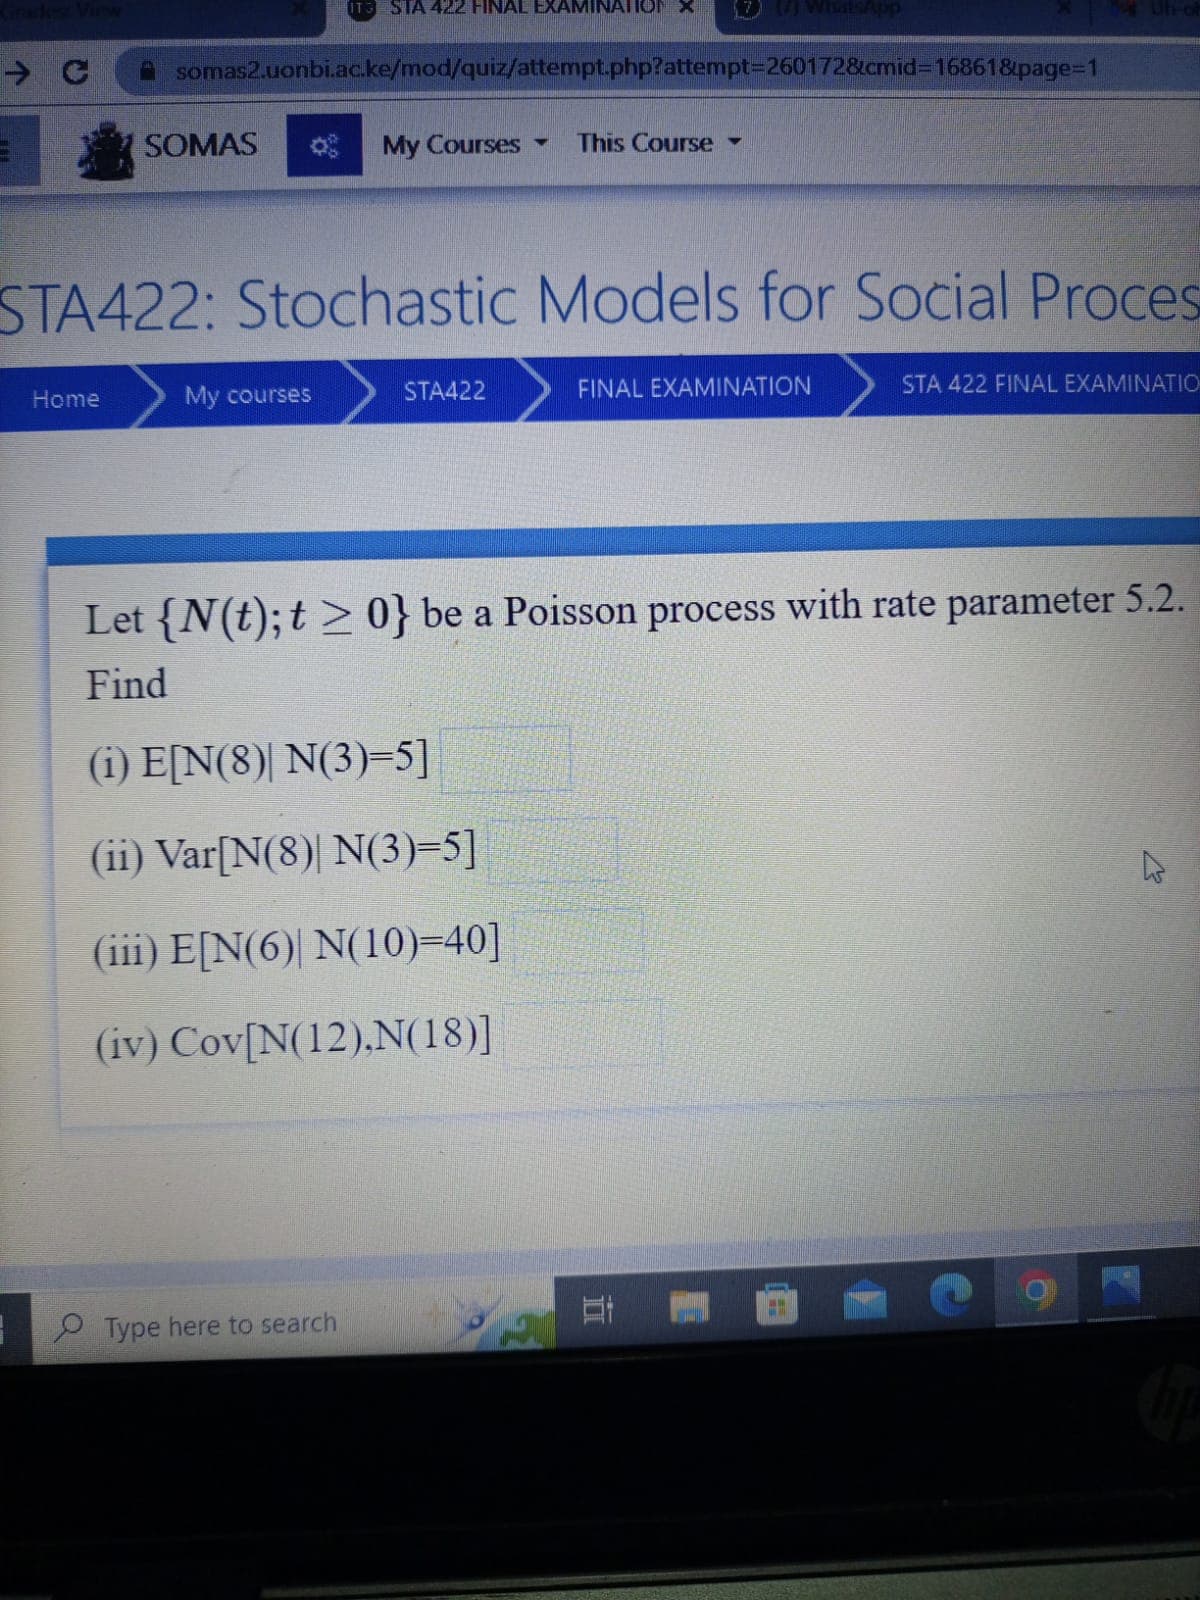 C
3
Home
somas2.uonbi.ac.ke/mod/quiz/attempt.php?attempt=2601728cmid=16861&page=1
SOMAS
IT3 SIA 422 FINAL EXAMINATIO
STA422: Stochastic Models for Social Proces
My courses
My Courses This Course
Type here to search
▼
STA422
FINAL EXAMINATION
Let {N(t); t > 0} be a Poisson process with rate parameter 5.2.
Find
(1) E[N(8)| N(3)=5]
(ii) Var[N(8)| N(3)=5]
(iii) E[N(6) N(10)=40]
(iv) Cov[N(12),N(18)]
STA 422 FINAL EXAMINATIO
201